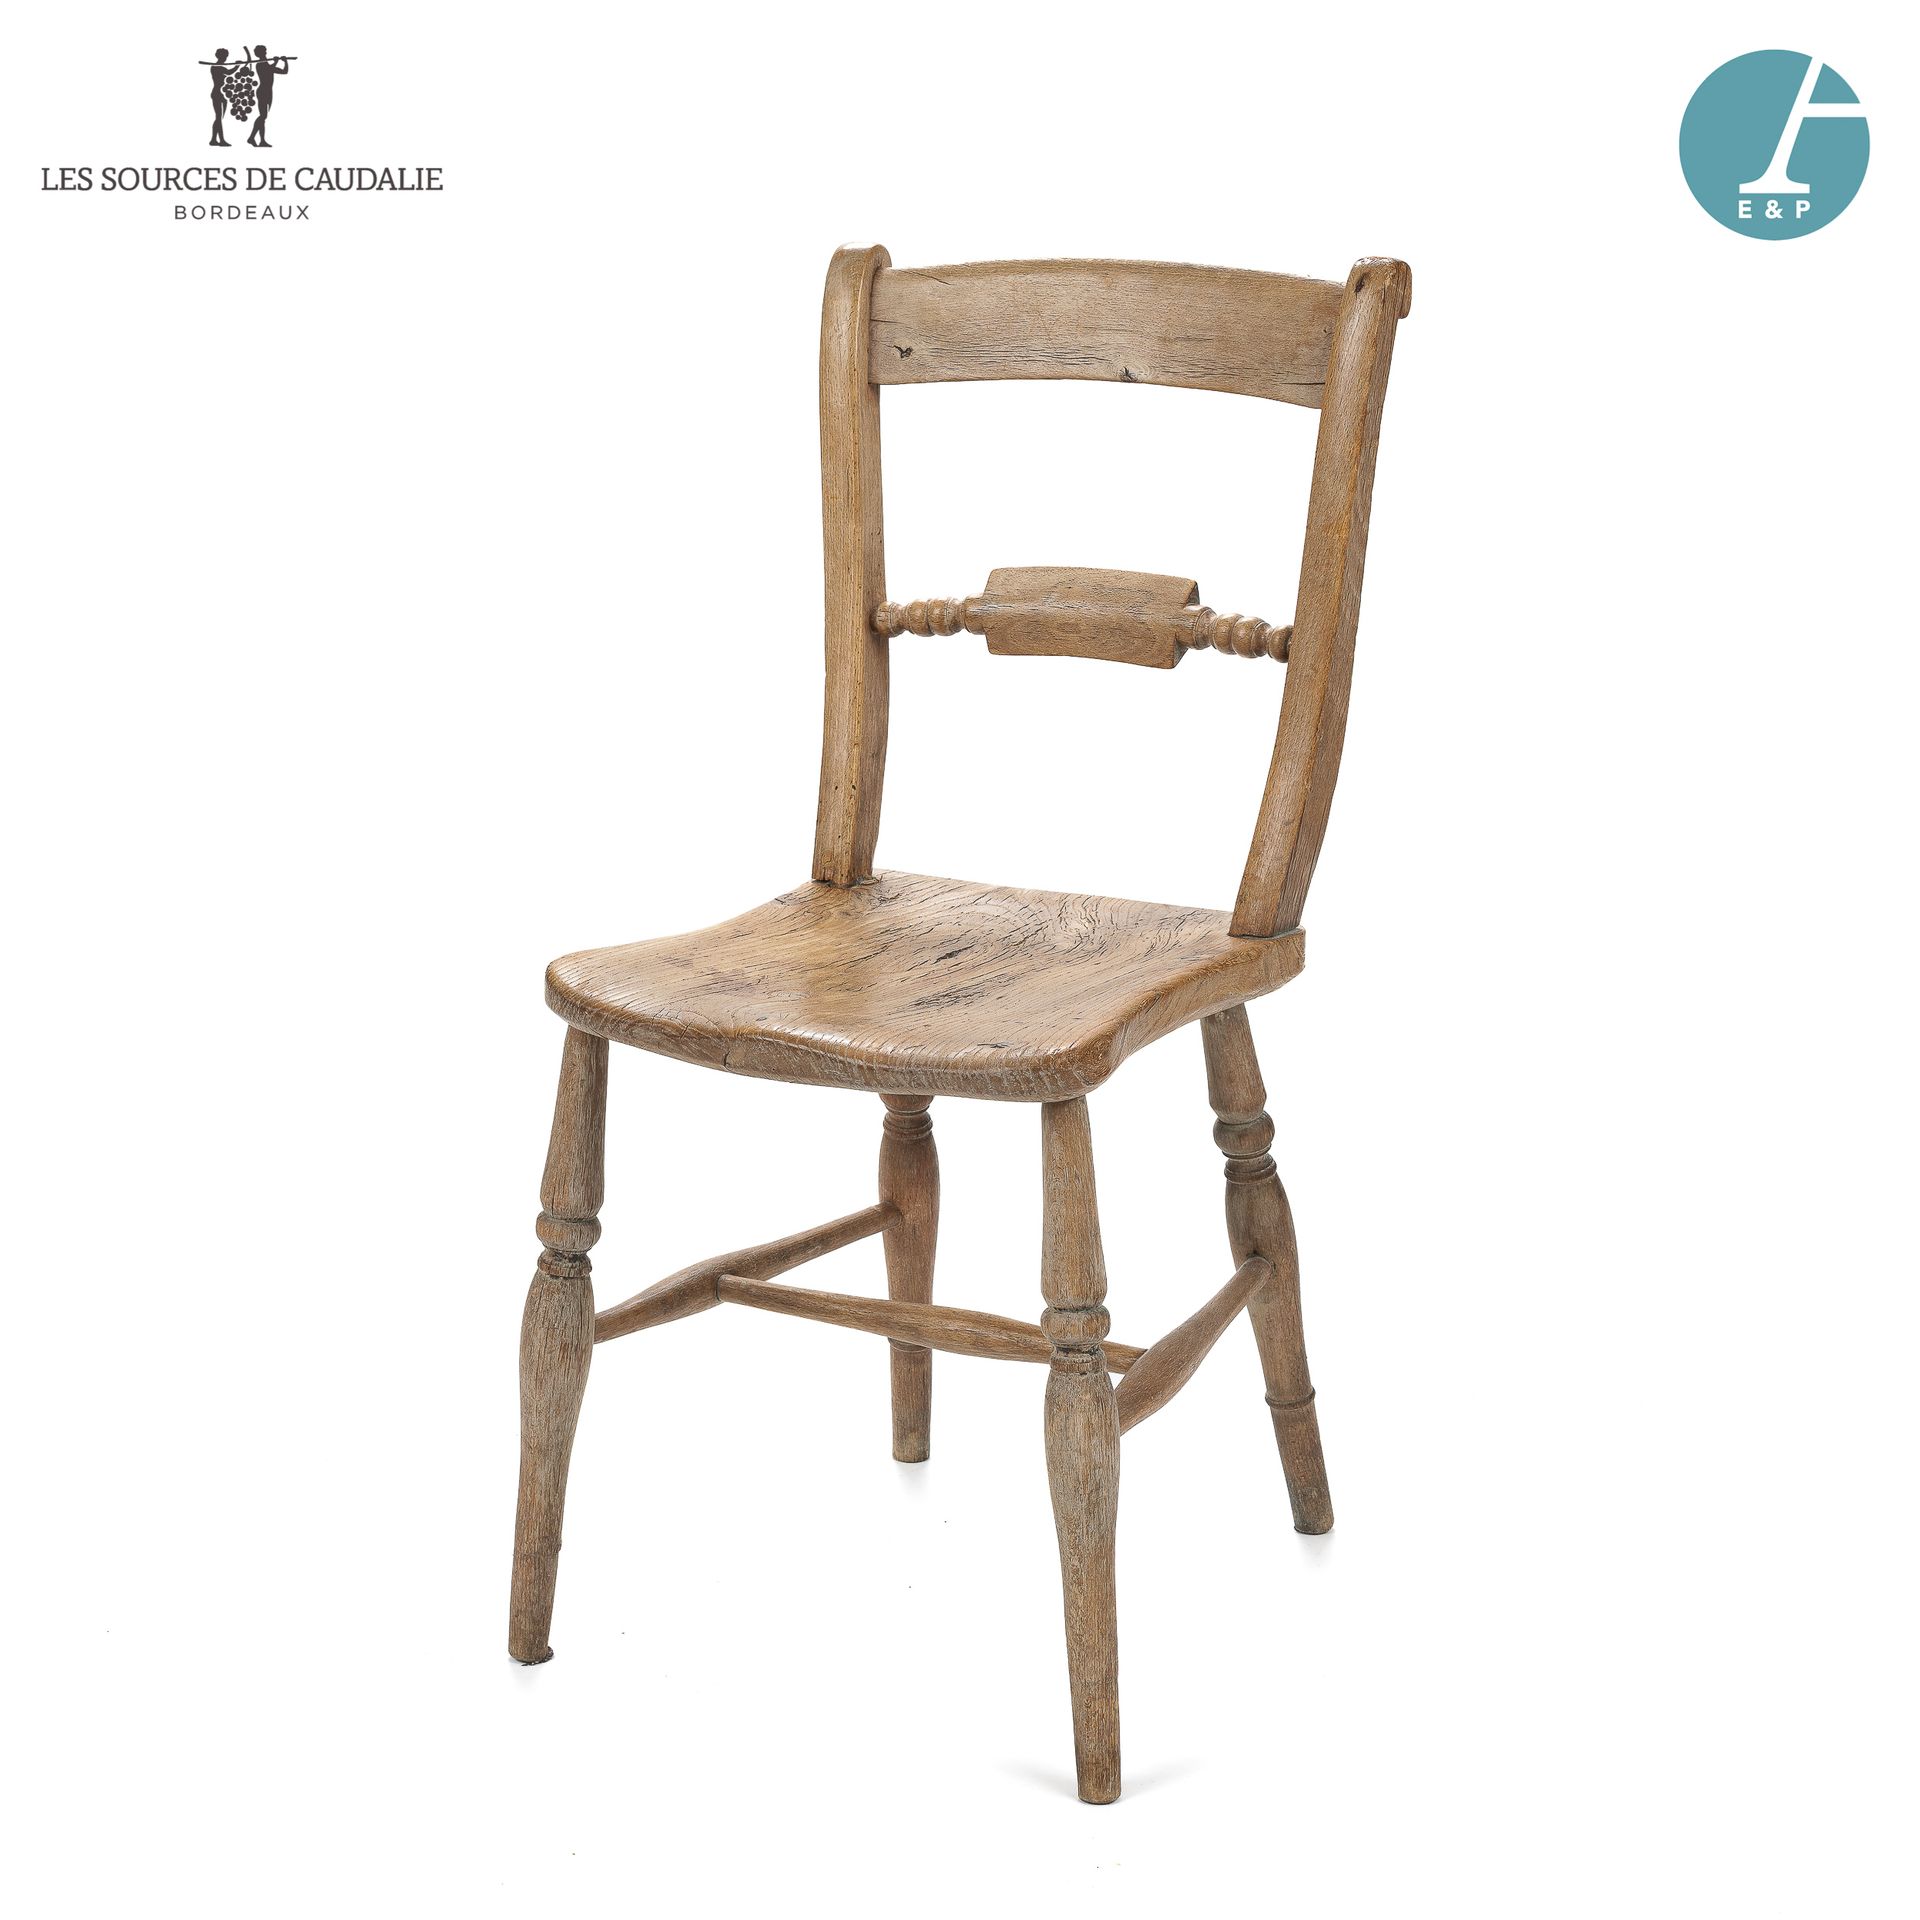 Null From Room #6 "La Part des Anges

Small chair in natural wood

H: 83,2cm - W&hellip;